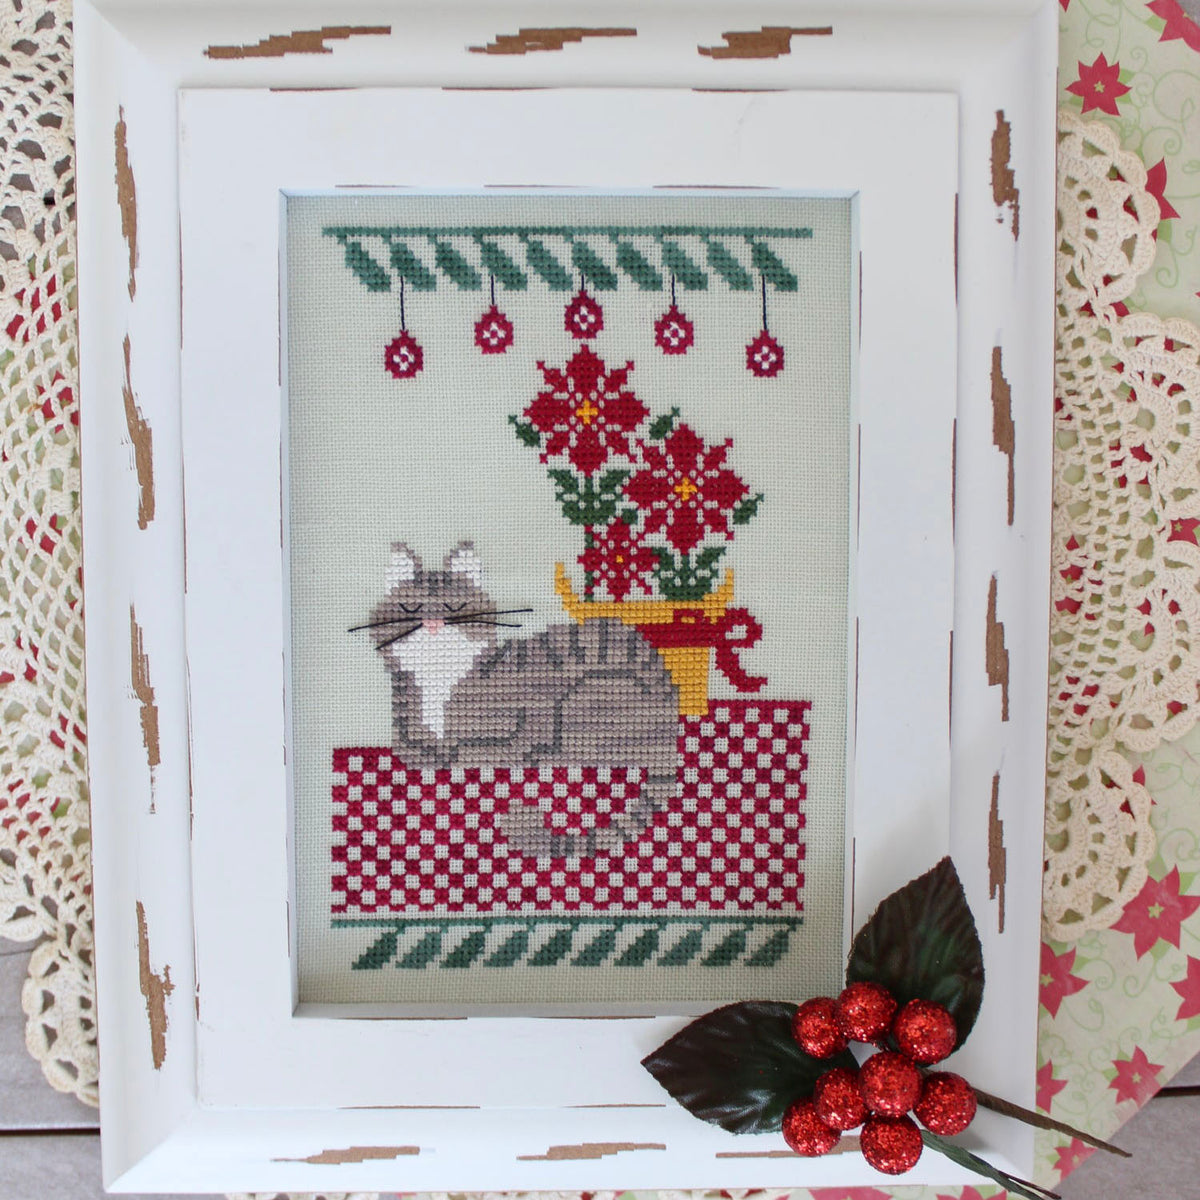 Dogs in the Garden Cross Stitch Pattern - Napping in the Poinsettias